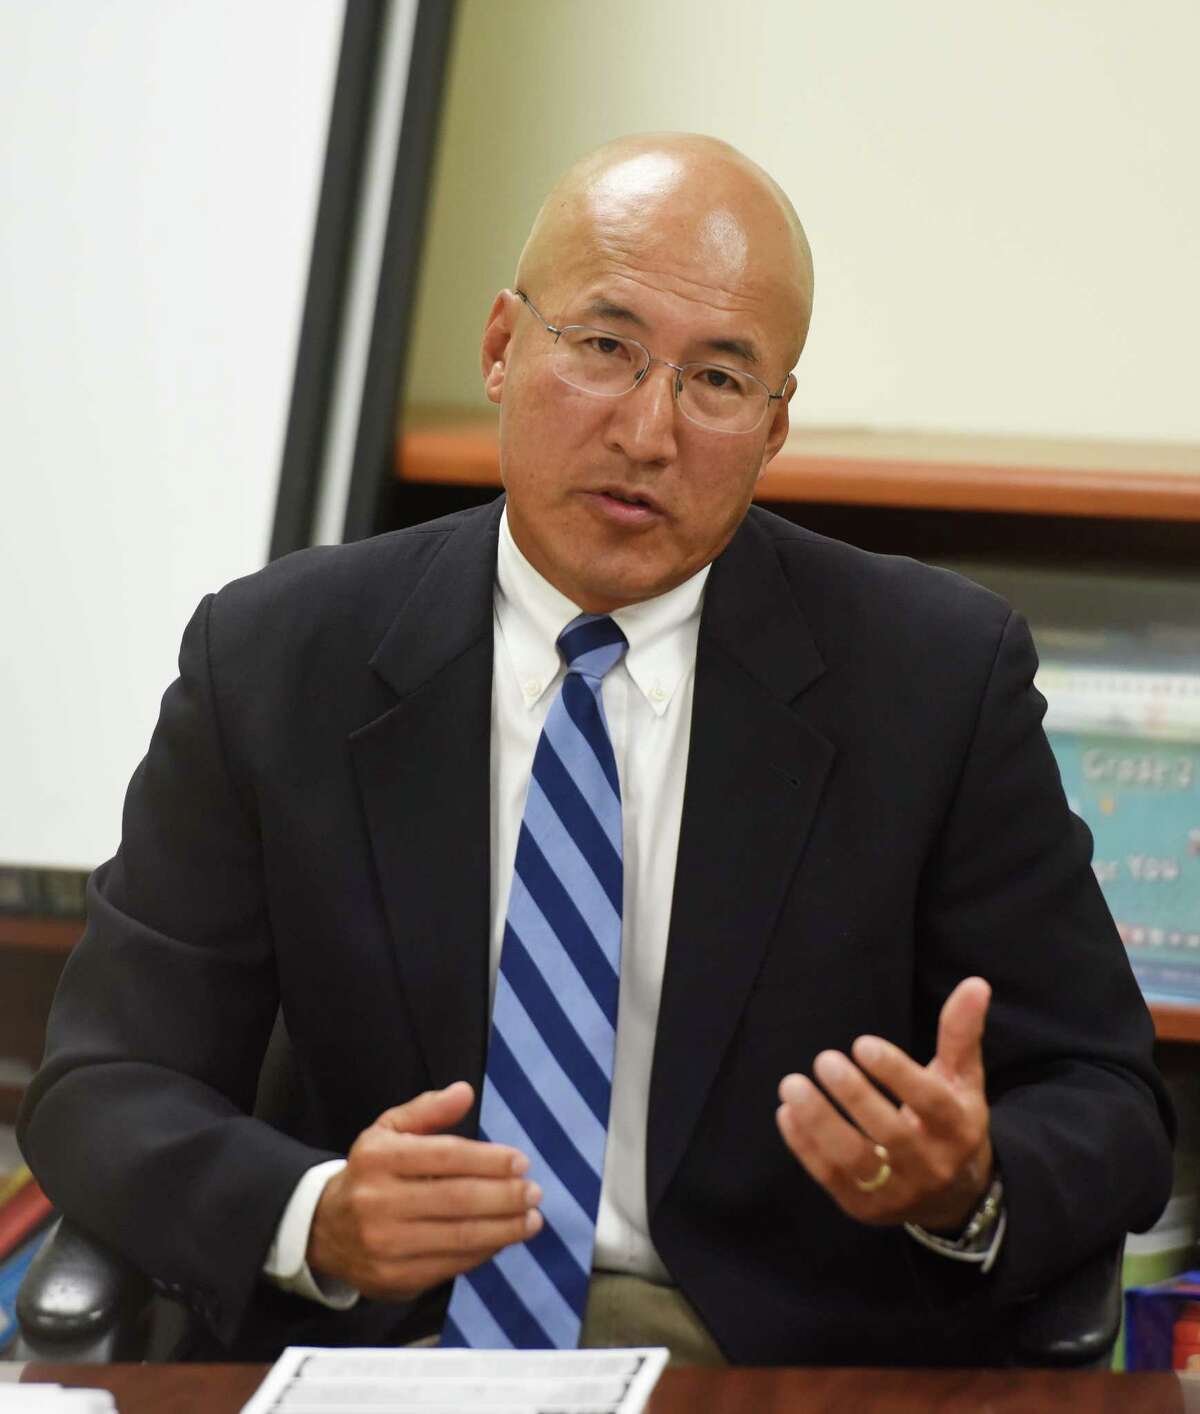 Suspended Greenwich High School band director John Yoon speaks during his hearing at the Greenwich Board of Education in Greenwich, Conn. Monday, Sept. 21, 2015. Yoon has been suspended after allegedly bullying two students last school year.